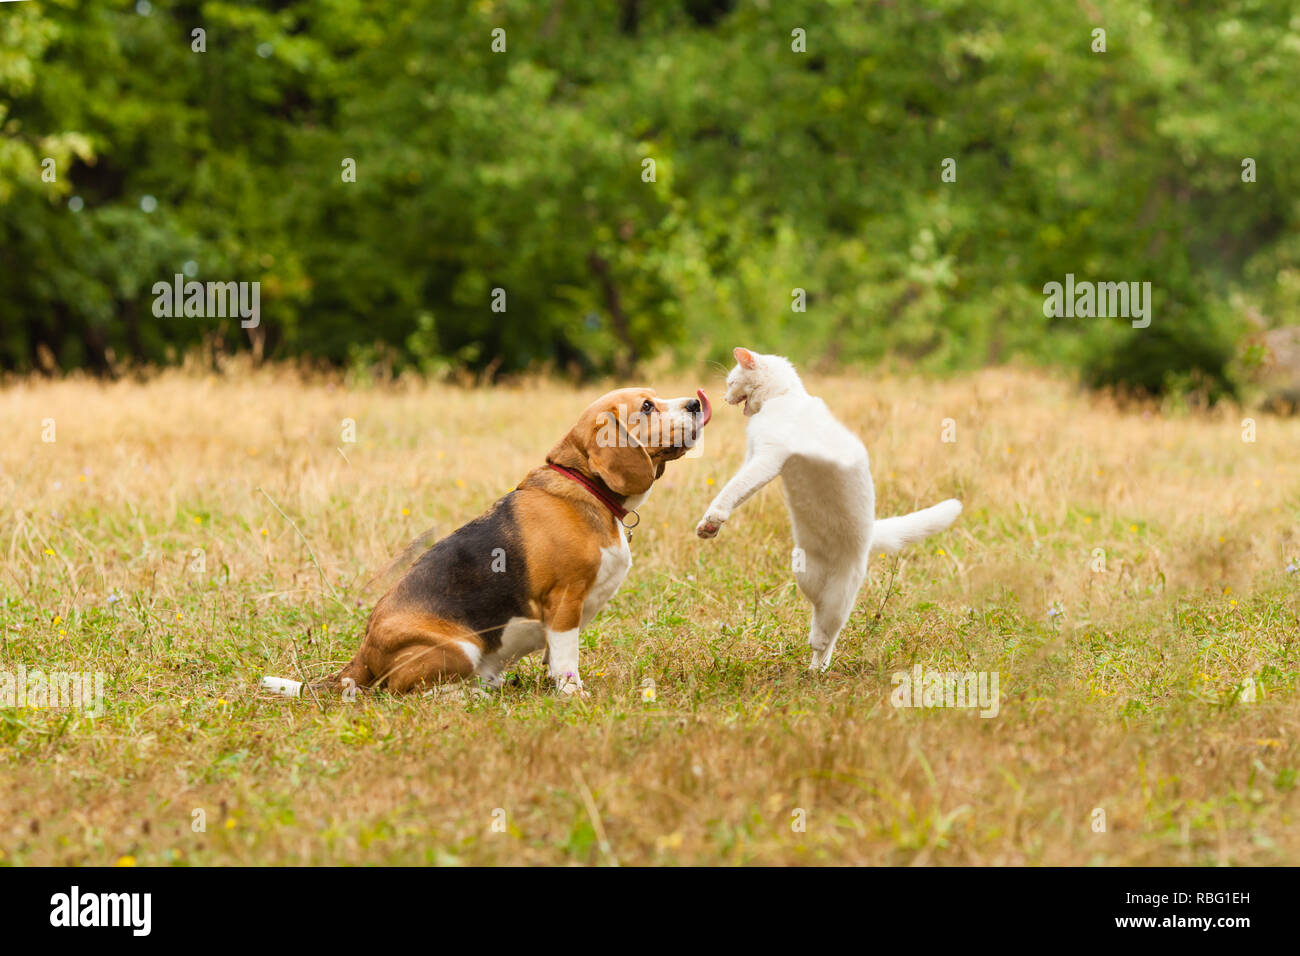 Close view of adorable Beagle dog fighting with white Turkish Angora cat. Dog's tongue is out, cat standing on her back paws with mouth wide open. Fas Stock Photo